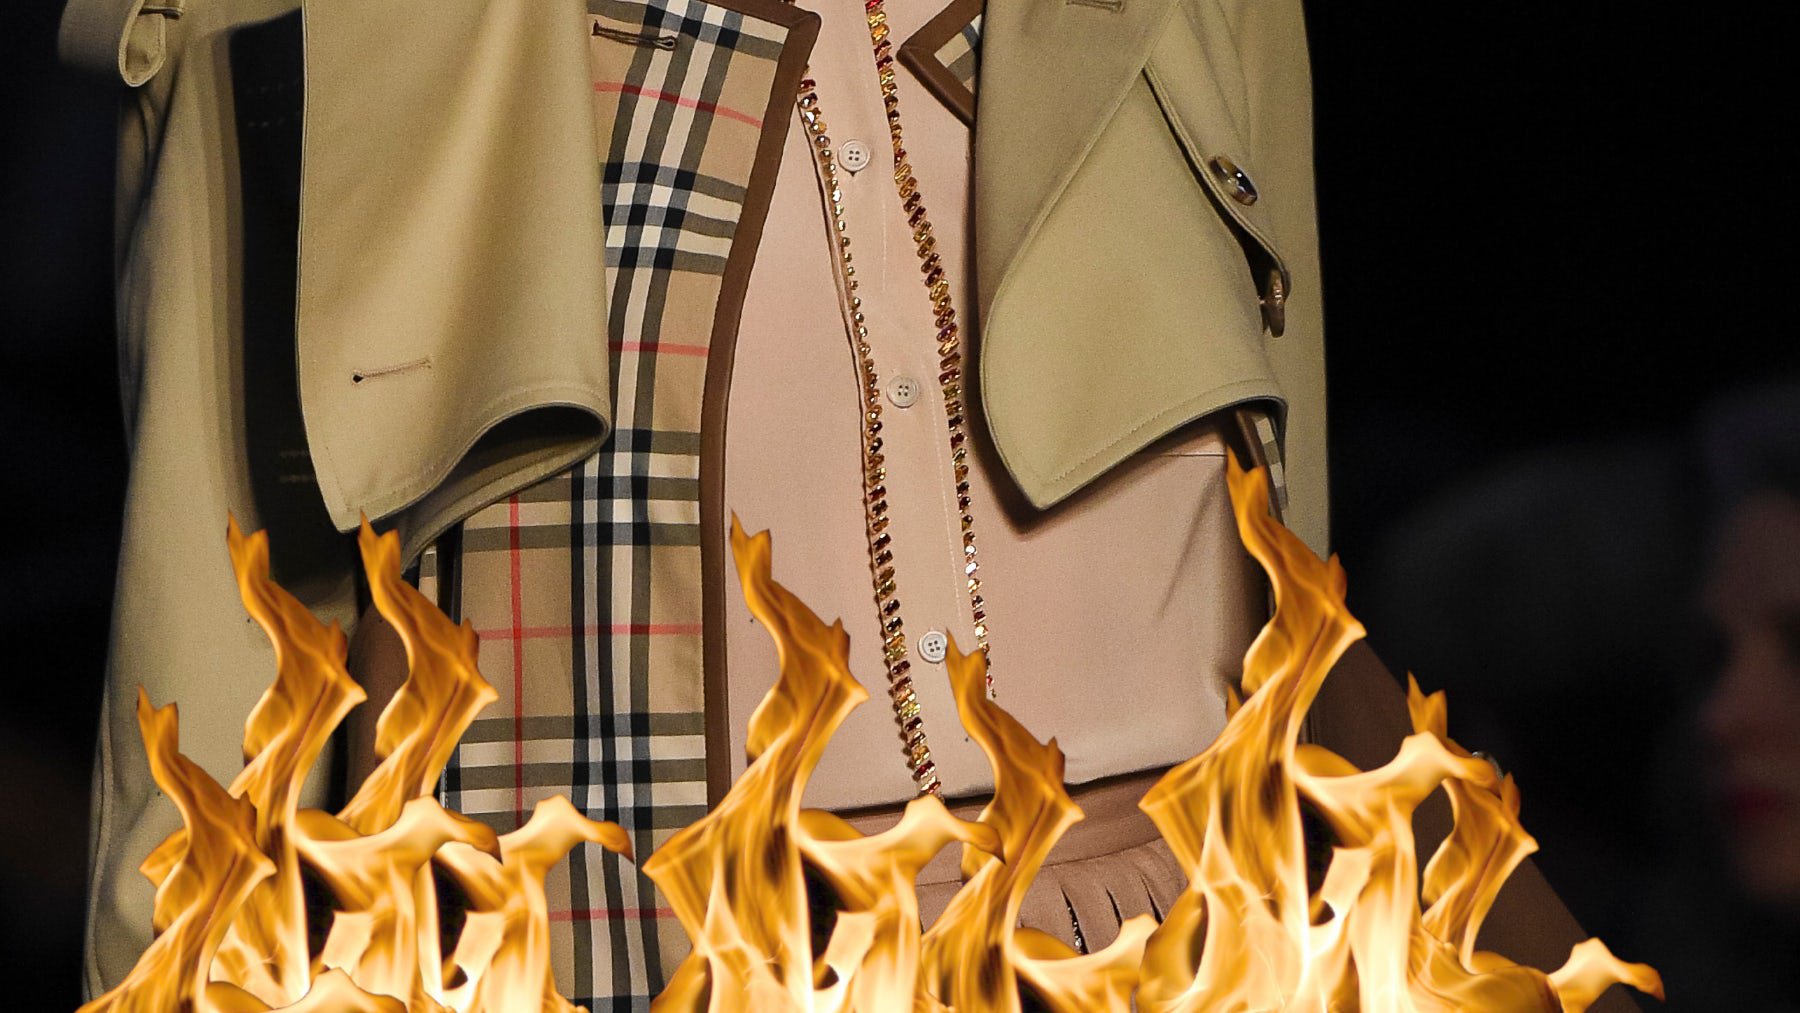 Does Louis Vuitton burn clothes after they go out of style? - Quora